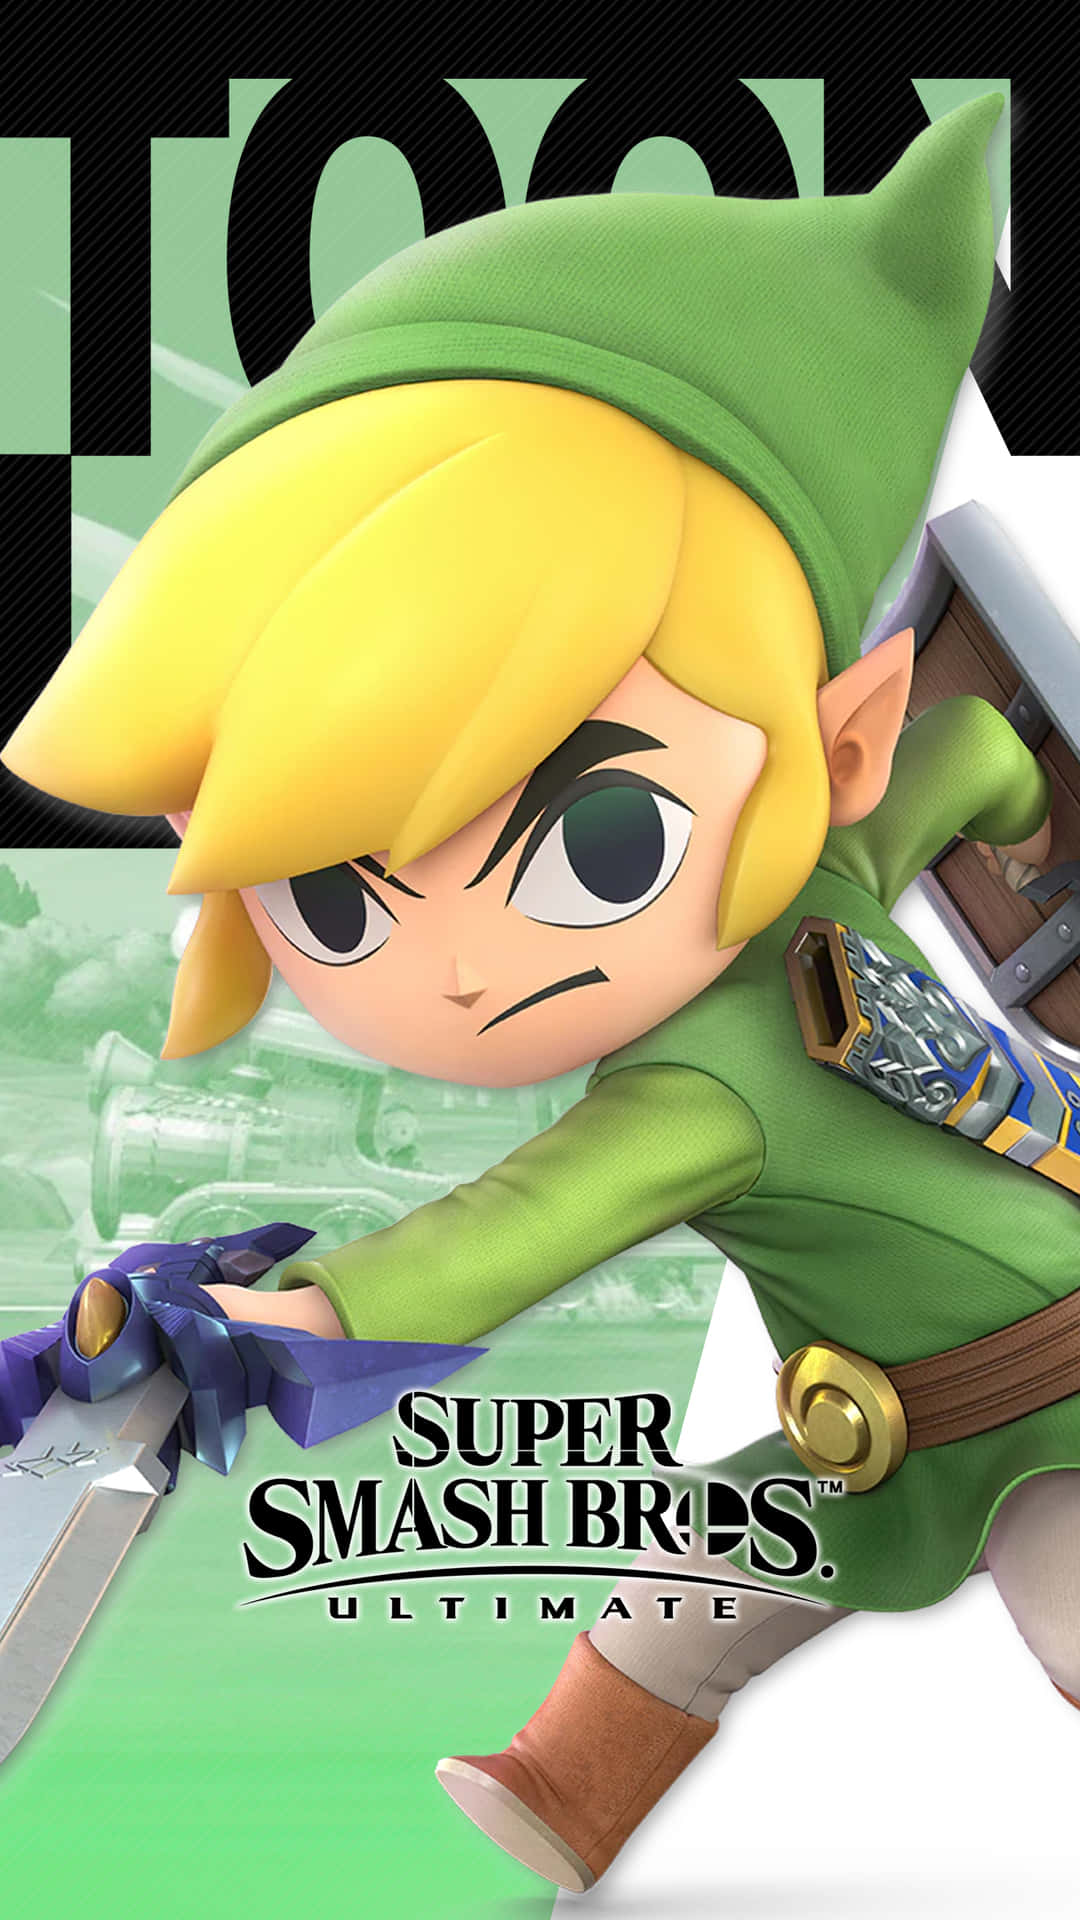 Toon Link Brings The Adventure To Life